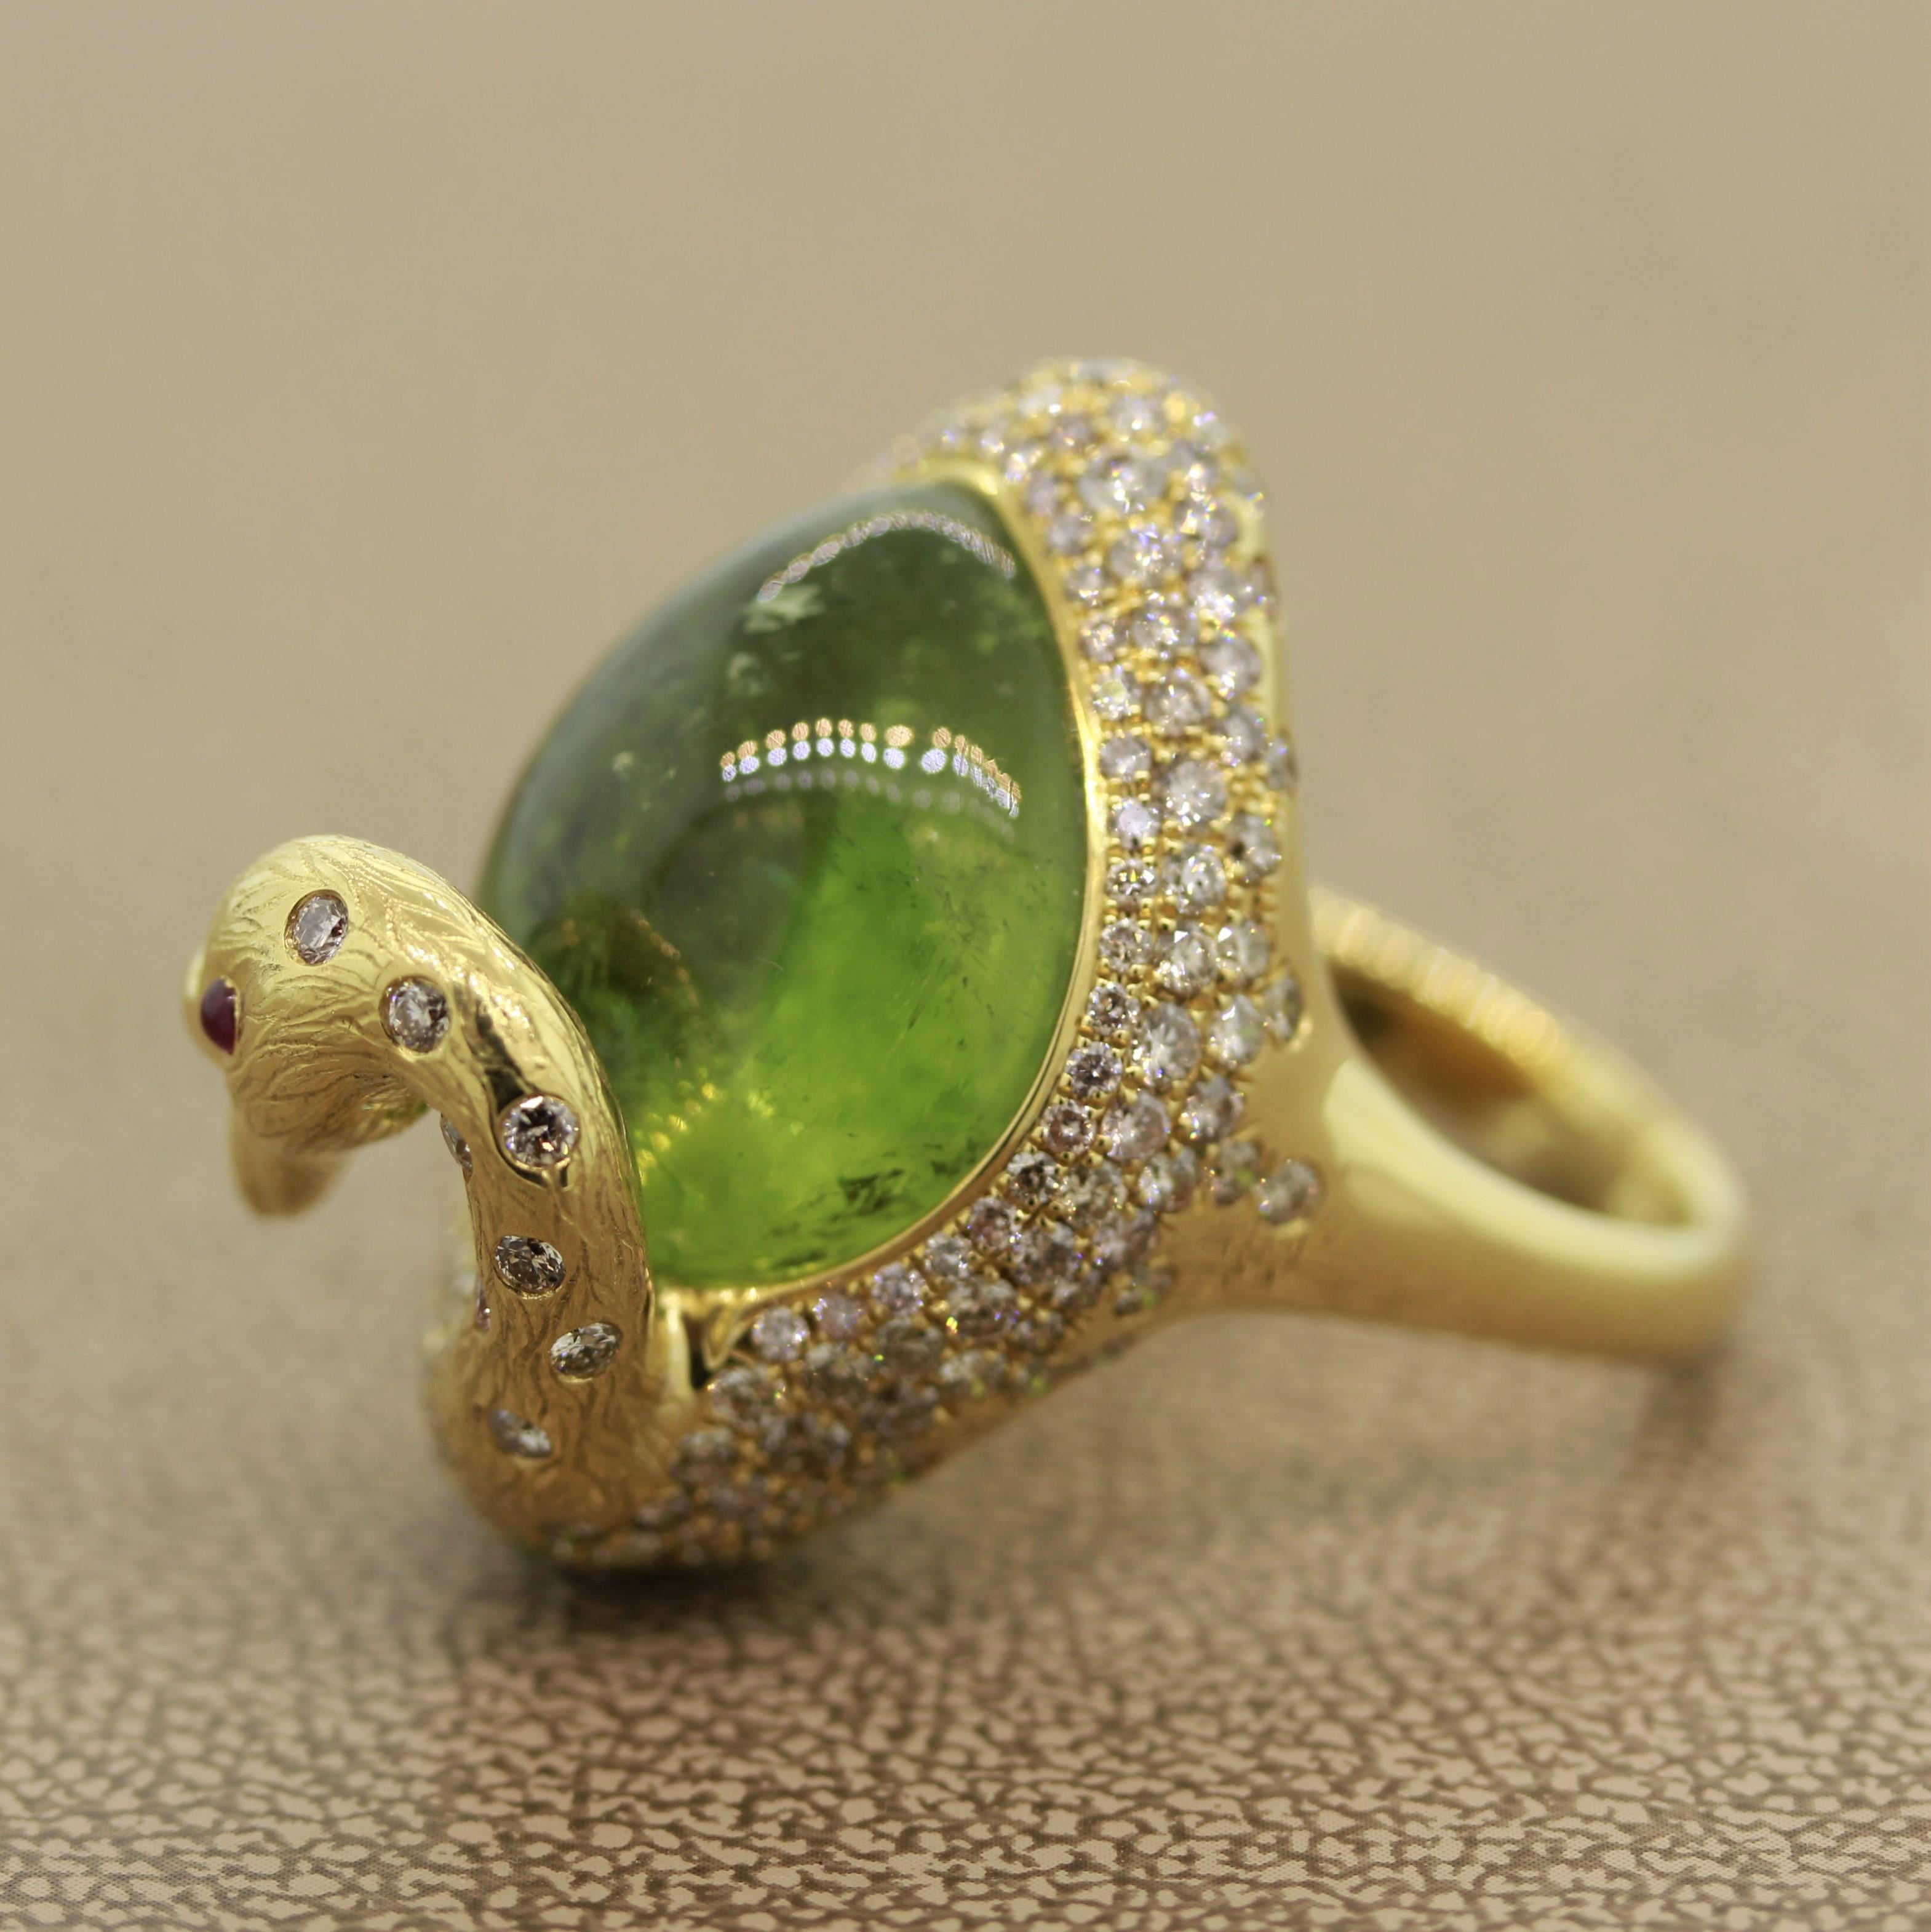 An unbelievably sweet swan ring. This cute piece features a 26.07ct green tourmaline cabochon. There are 2.75 carats of round brilliant cut diamonds set around the body and up the neck of the swan with 2 rubies eyes. The swan’s head has fine detail